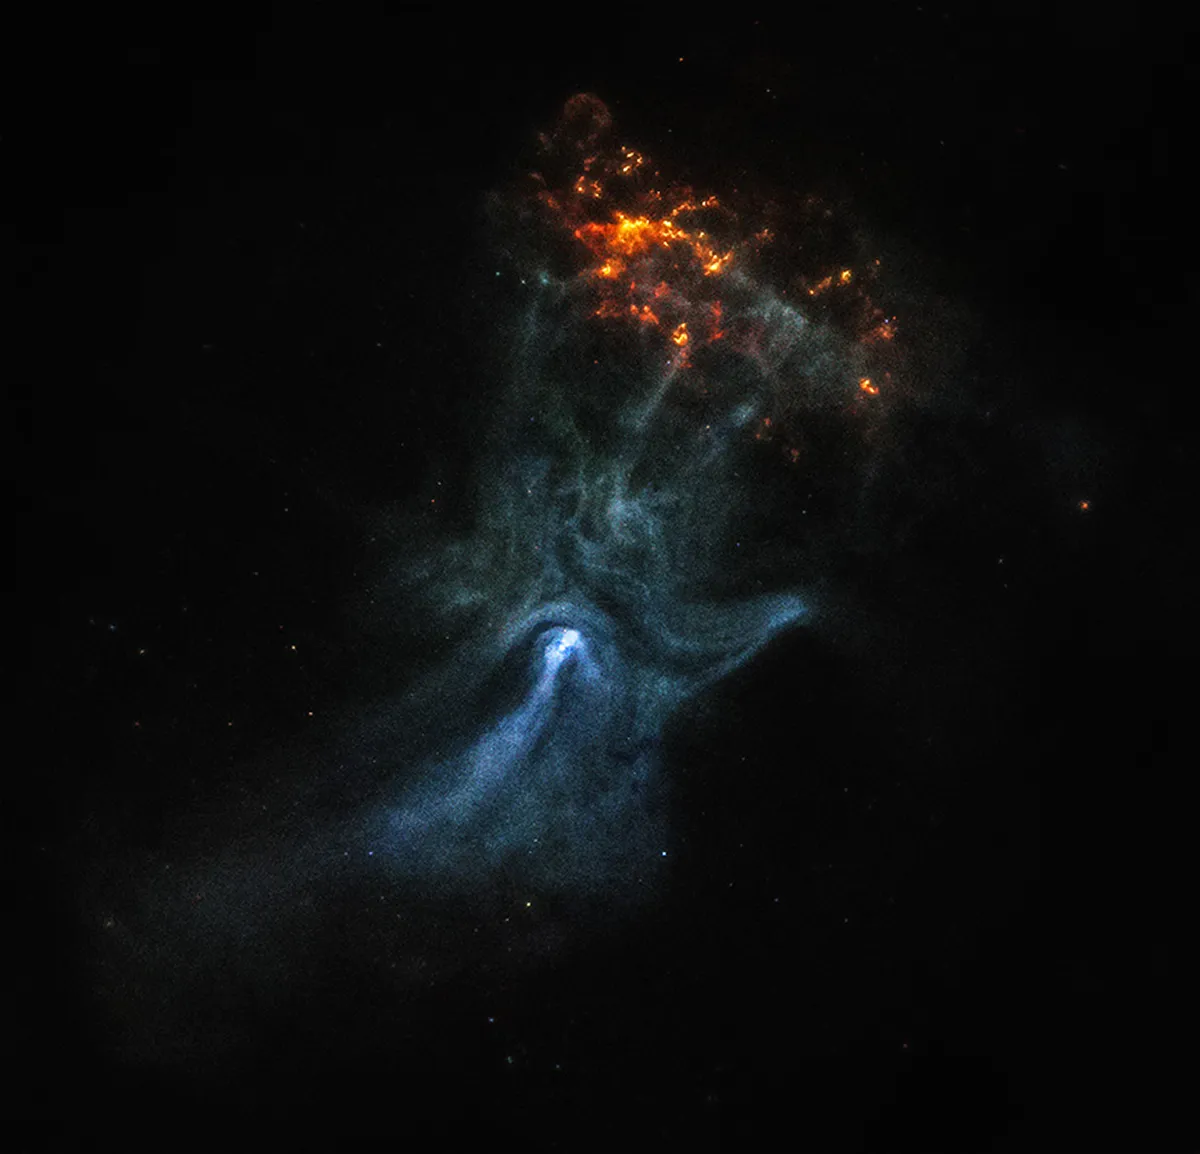 A view of pulsar wind nebula MSH 15-52 using only data from the Chandra X-ray Observatory. Credit: X-ray: NASA/CXC/Stanford Univ./R. Romani et al. (Chandra)